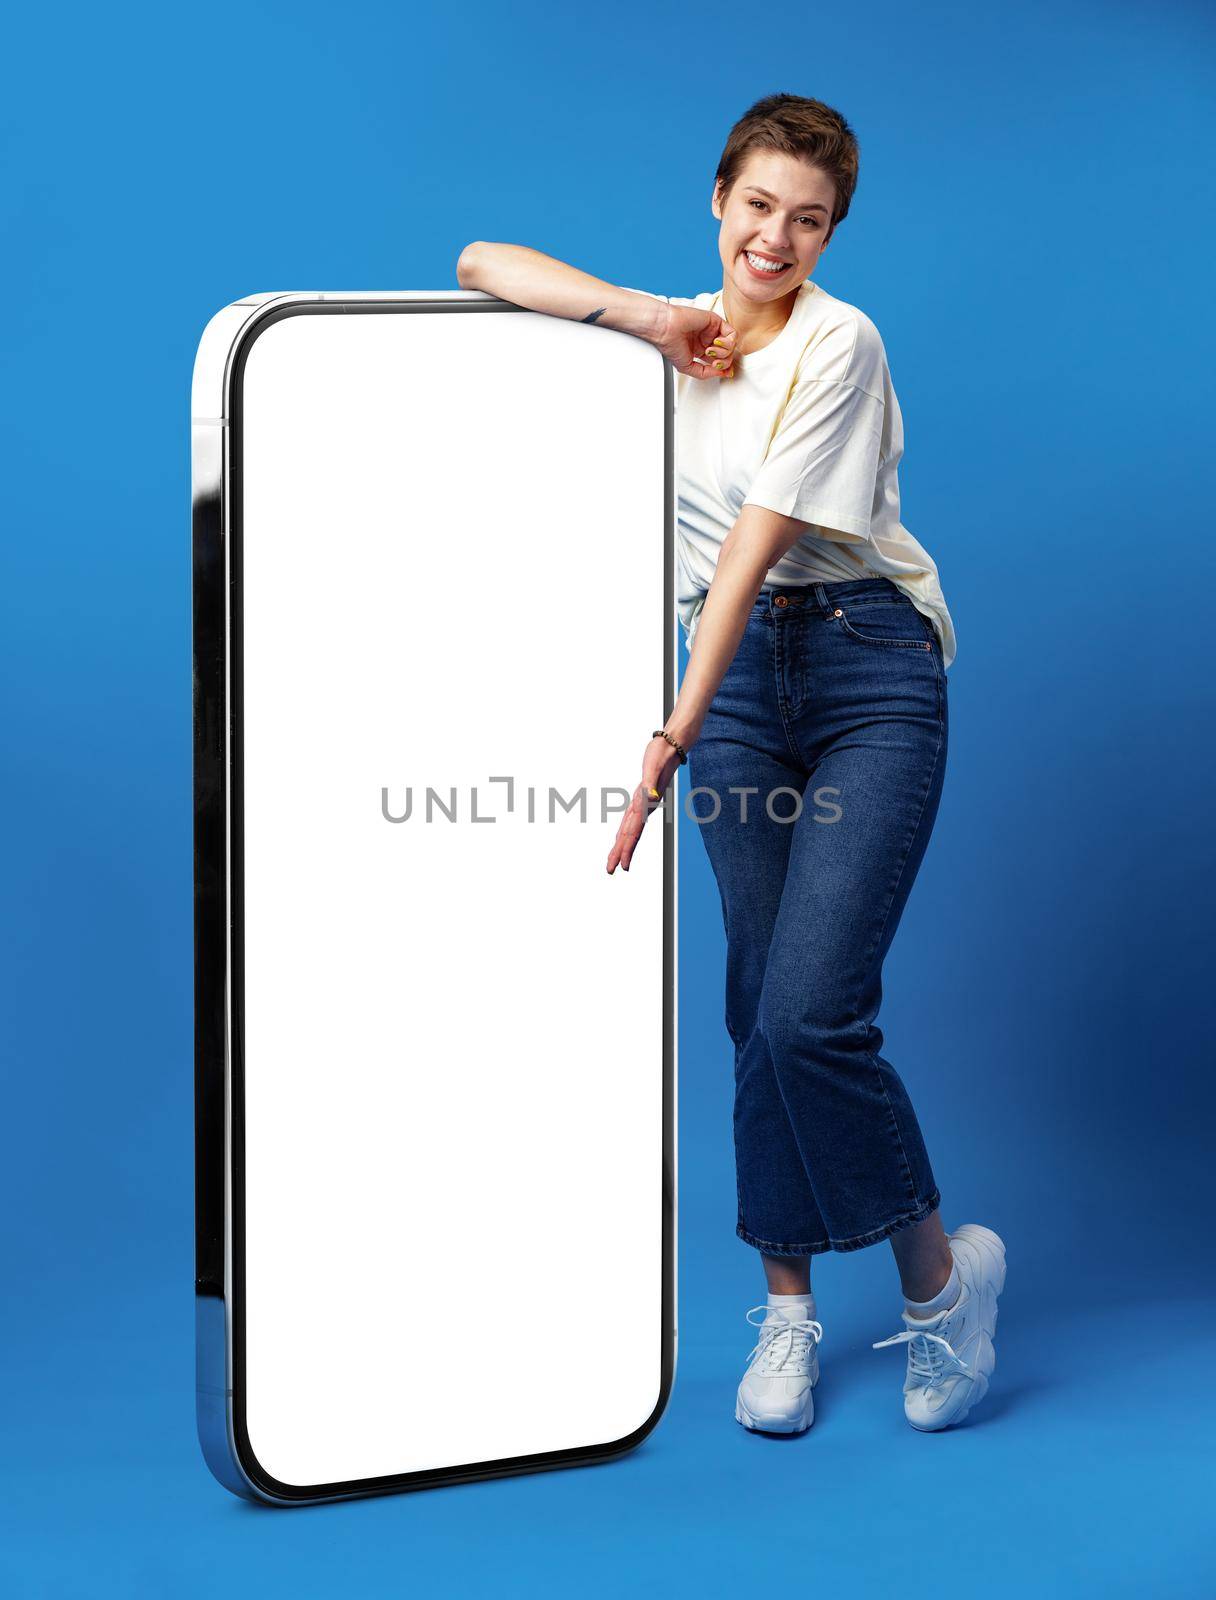 Happy young woman leaning on huge cellphone with empty white screen, for your ad, mock up, blue backgorund